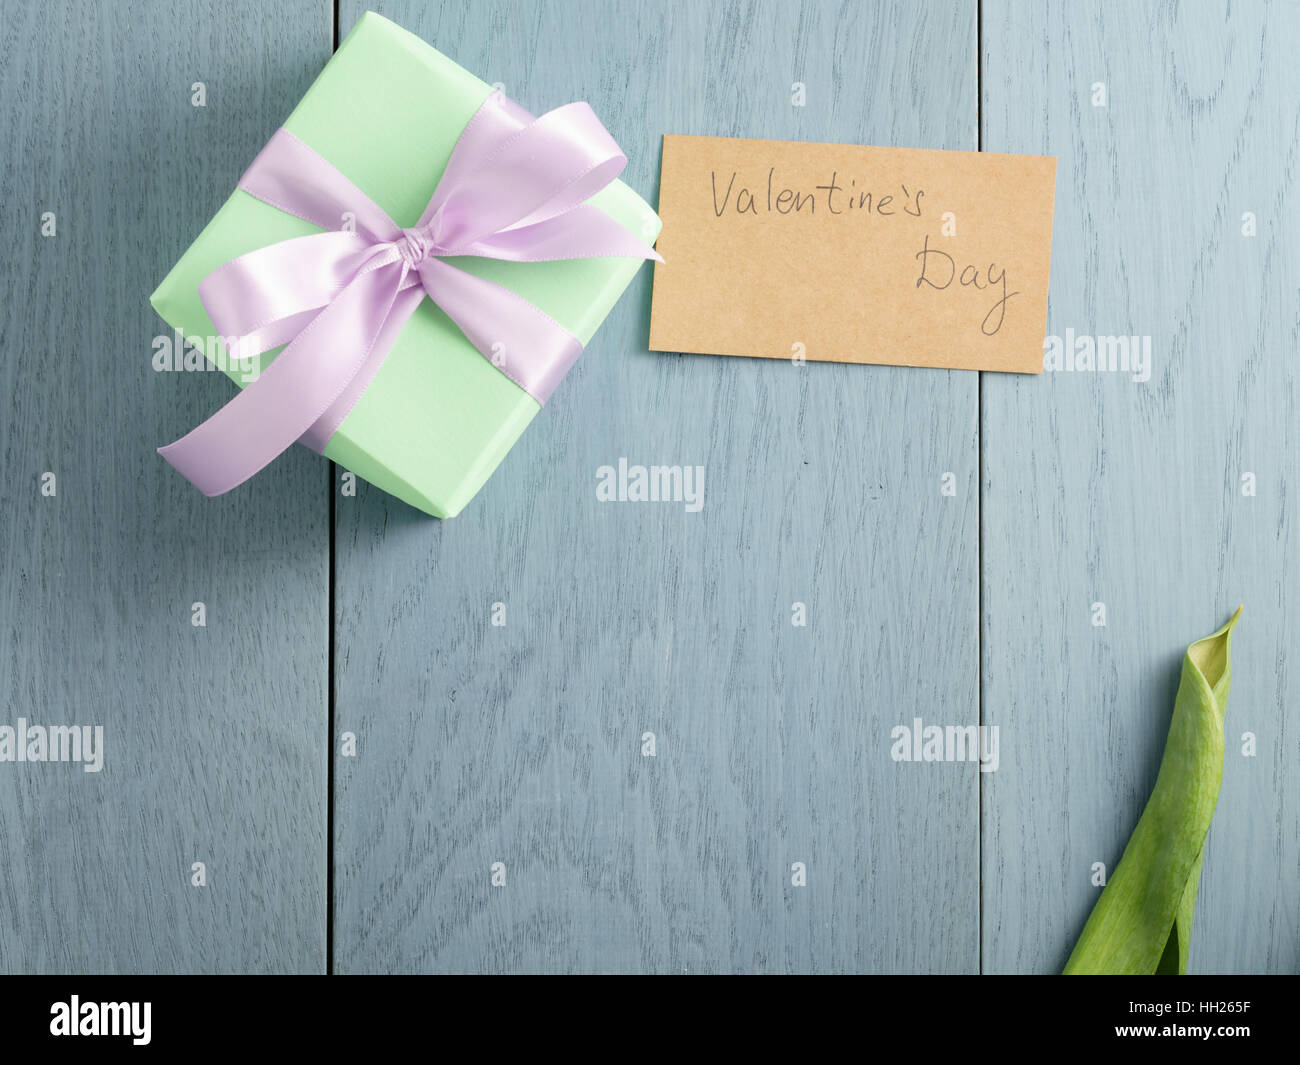 green gift box on blue wood table with paper card for valentines day Stock Photo